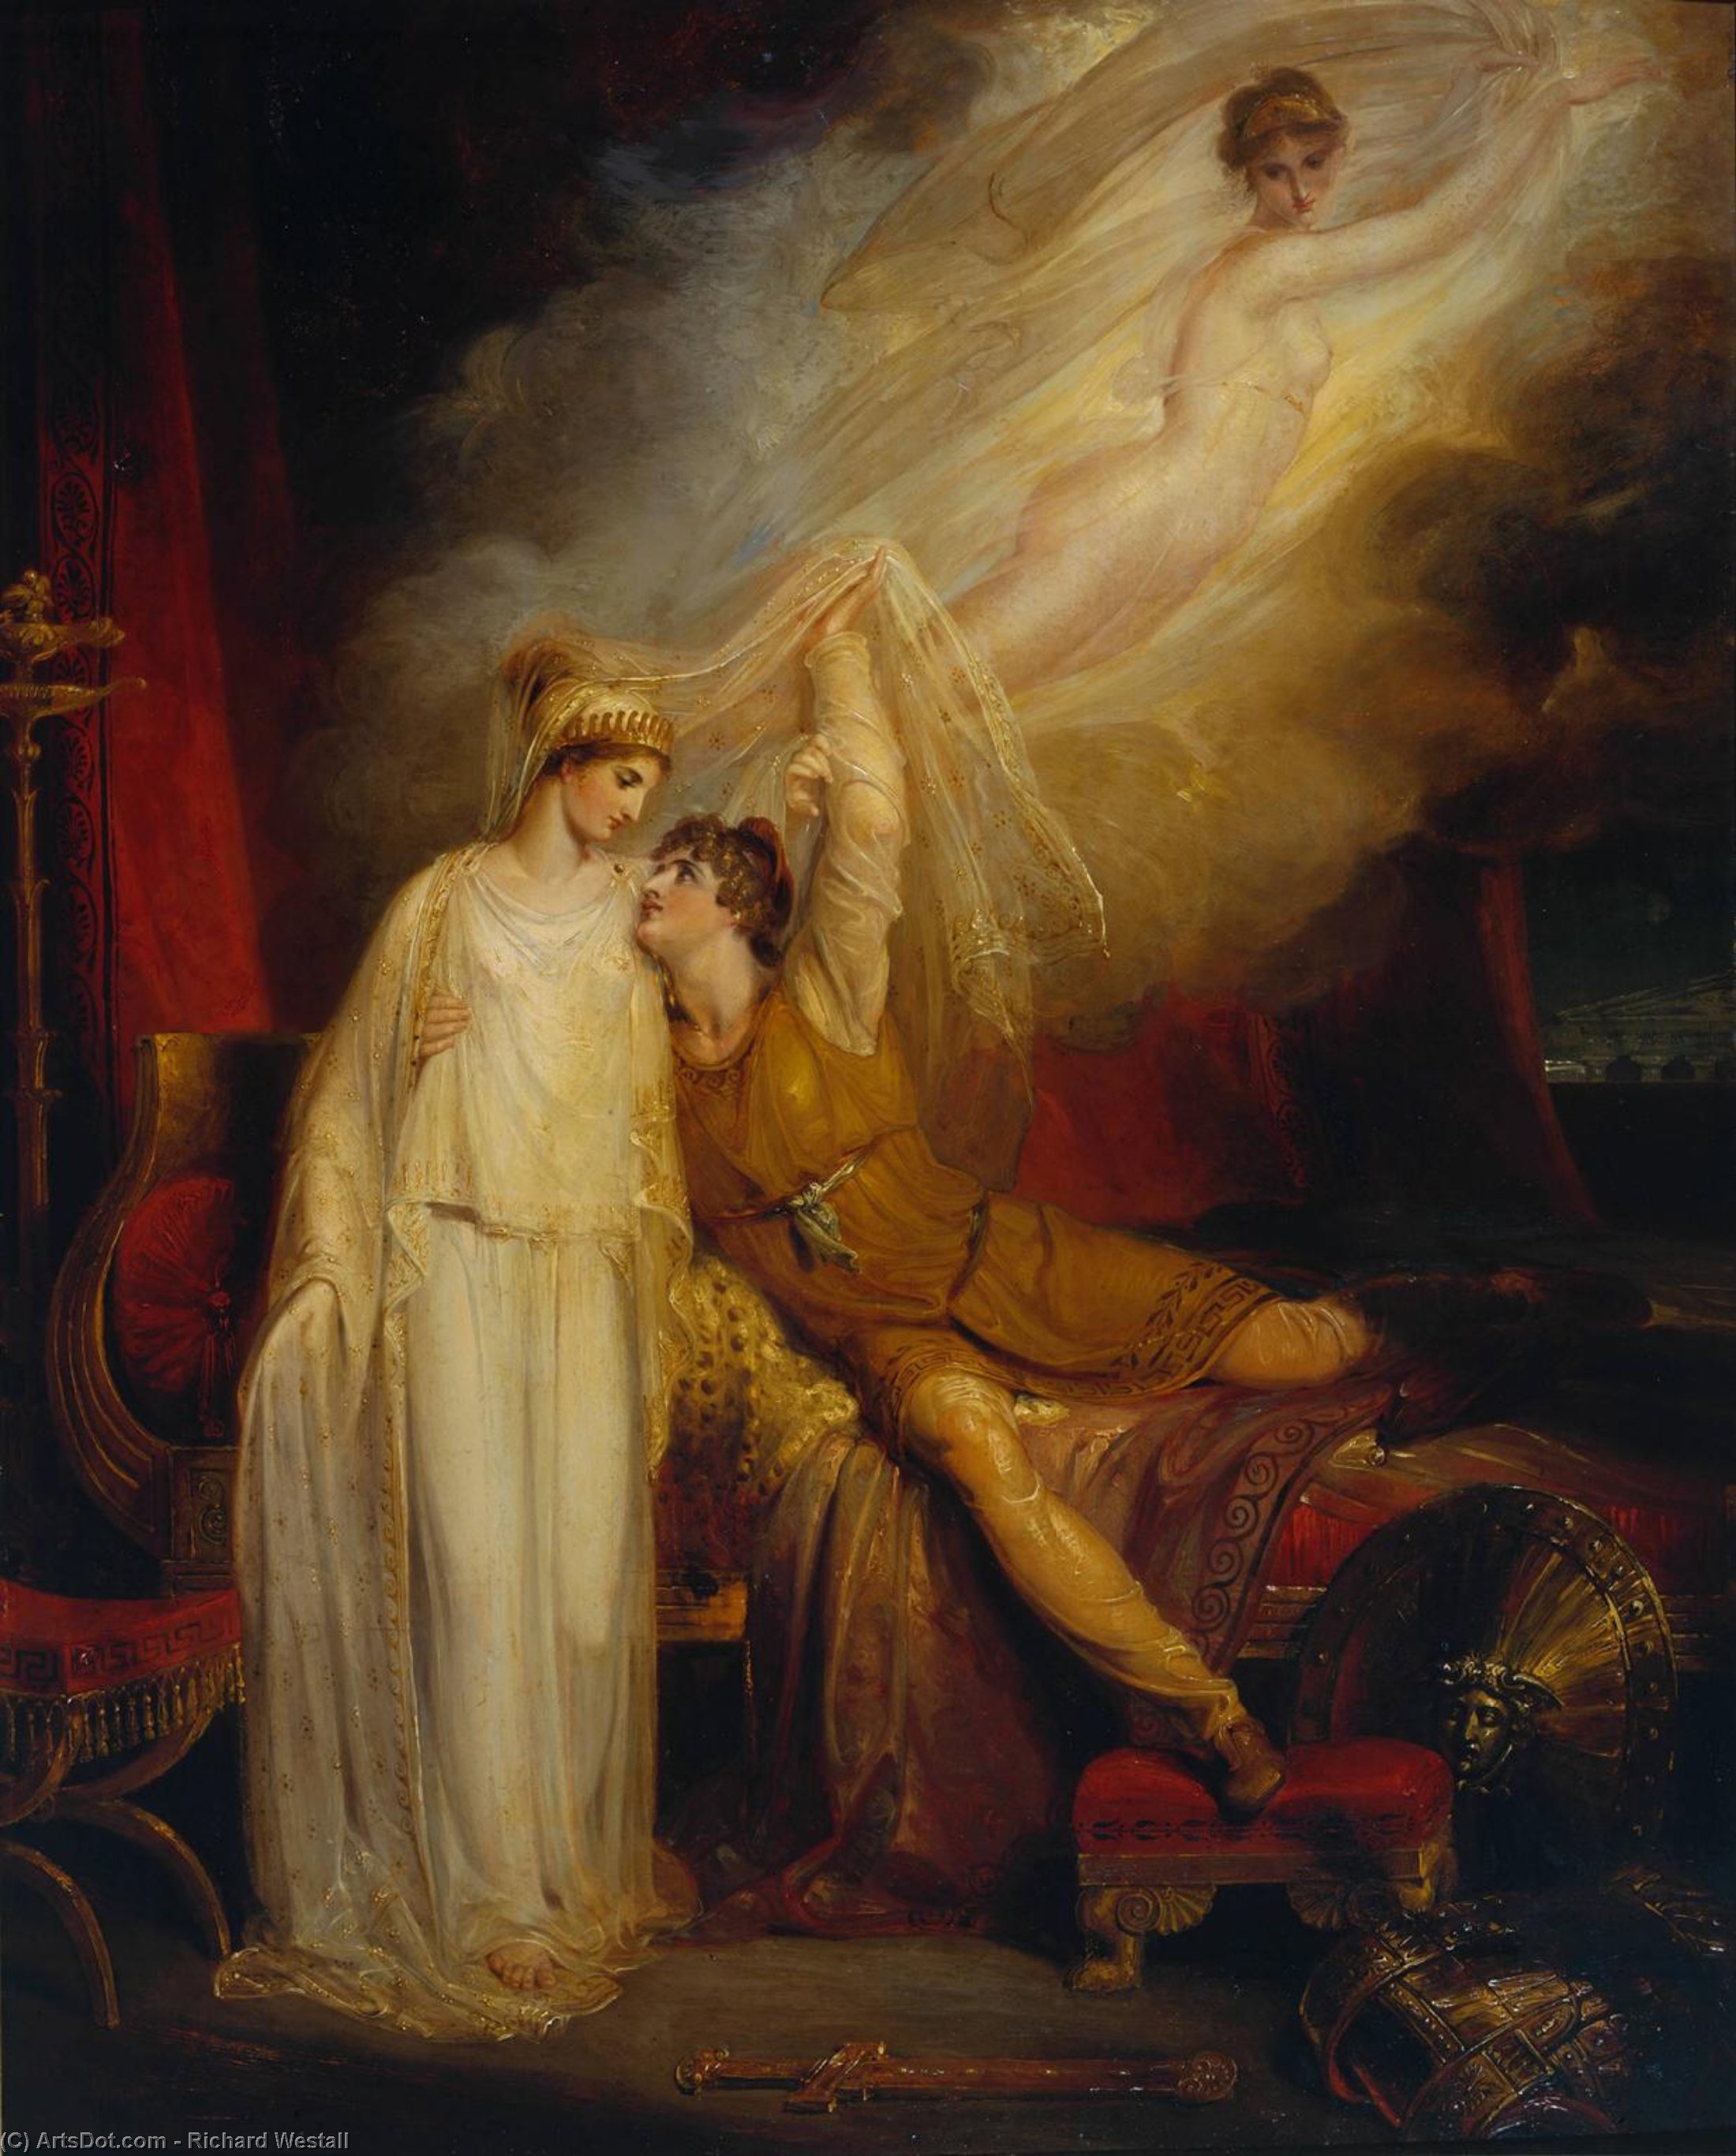 Buy Museum Art Reproductions The Reconciliation Of Helen And Paris After His Defeat By Menelaus by Richard Westall (1765-1836, United Kingdom) | ArtsDot.com